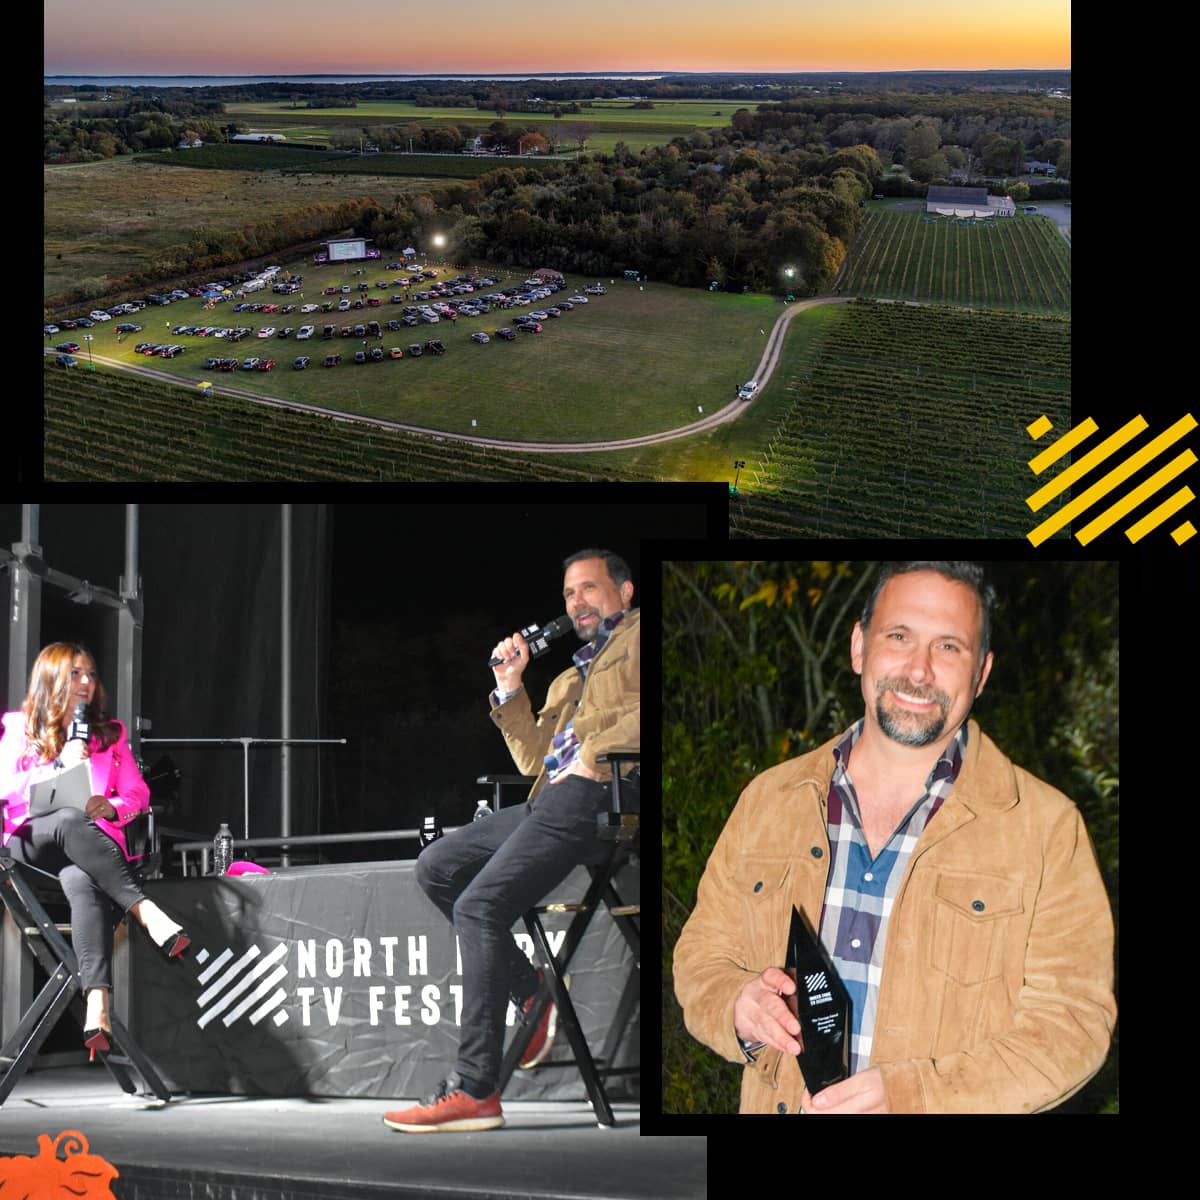 Collage with aerial view of NorthFork TV field, Jeremy Sisto holding NorthFork TV award and speaking to panelist